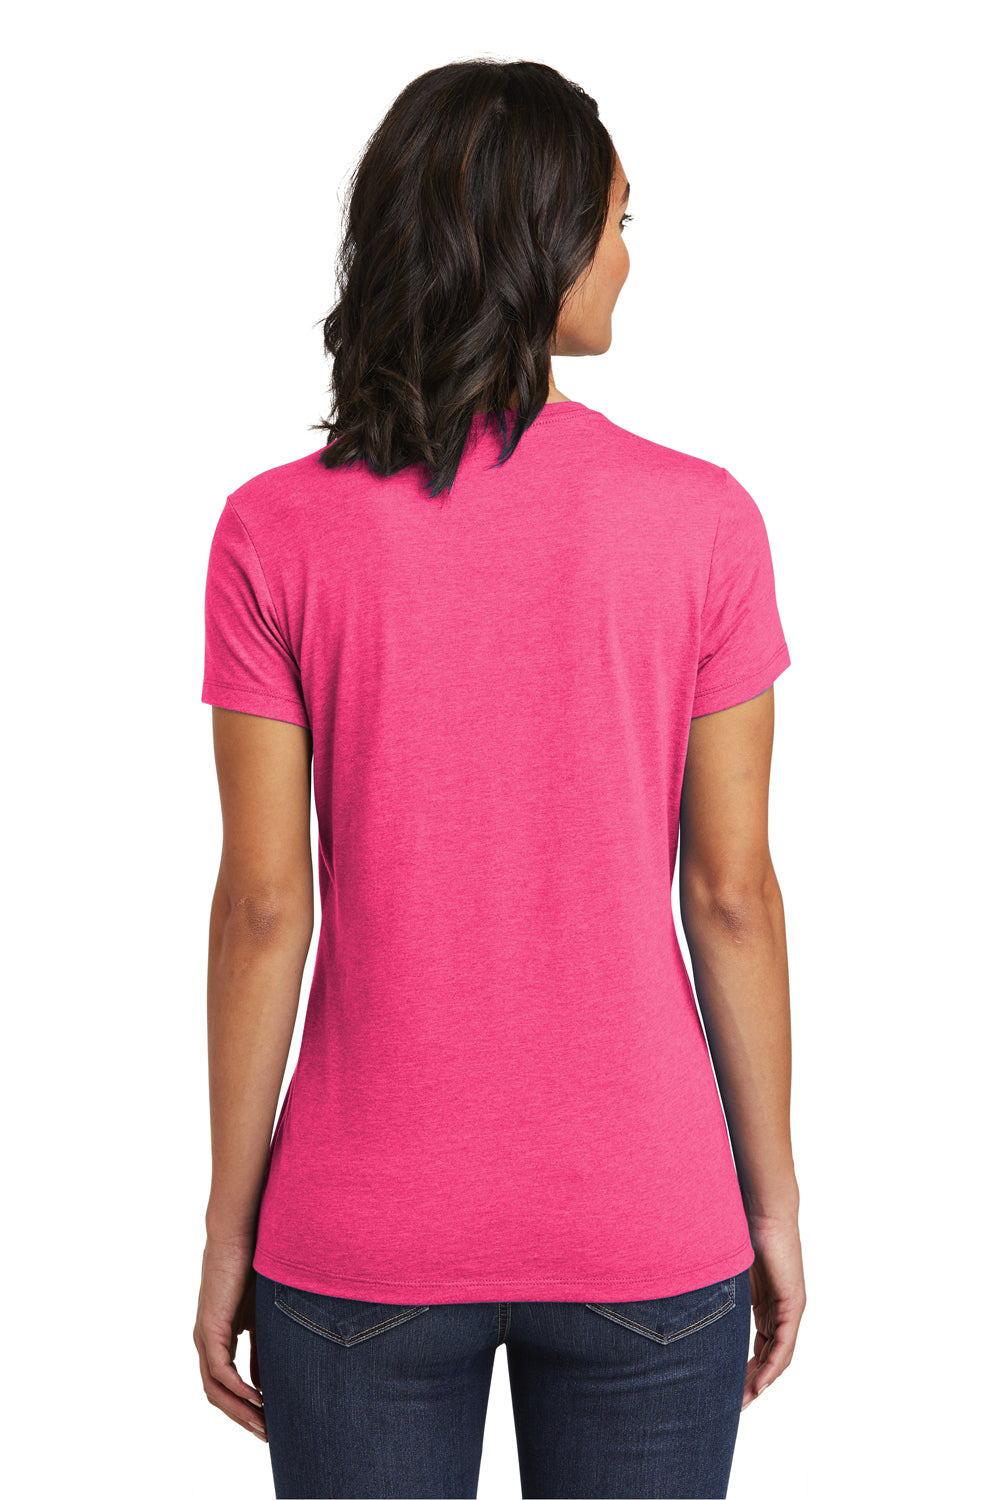 District DT6002 Womens Very Important Short Sleeve Crewneck T-Shirt Heather Fuchsia Pink Back